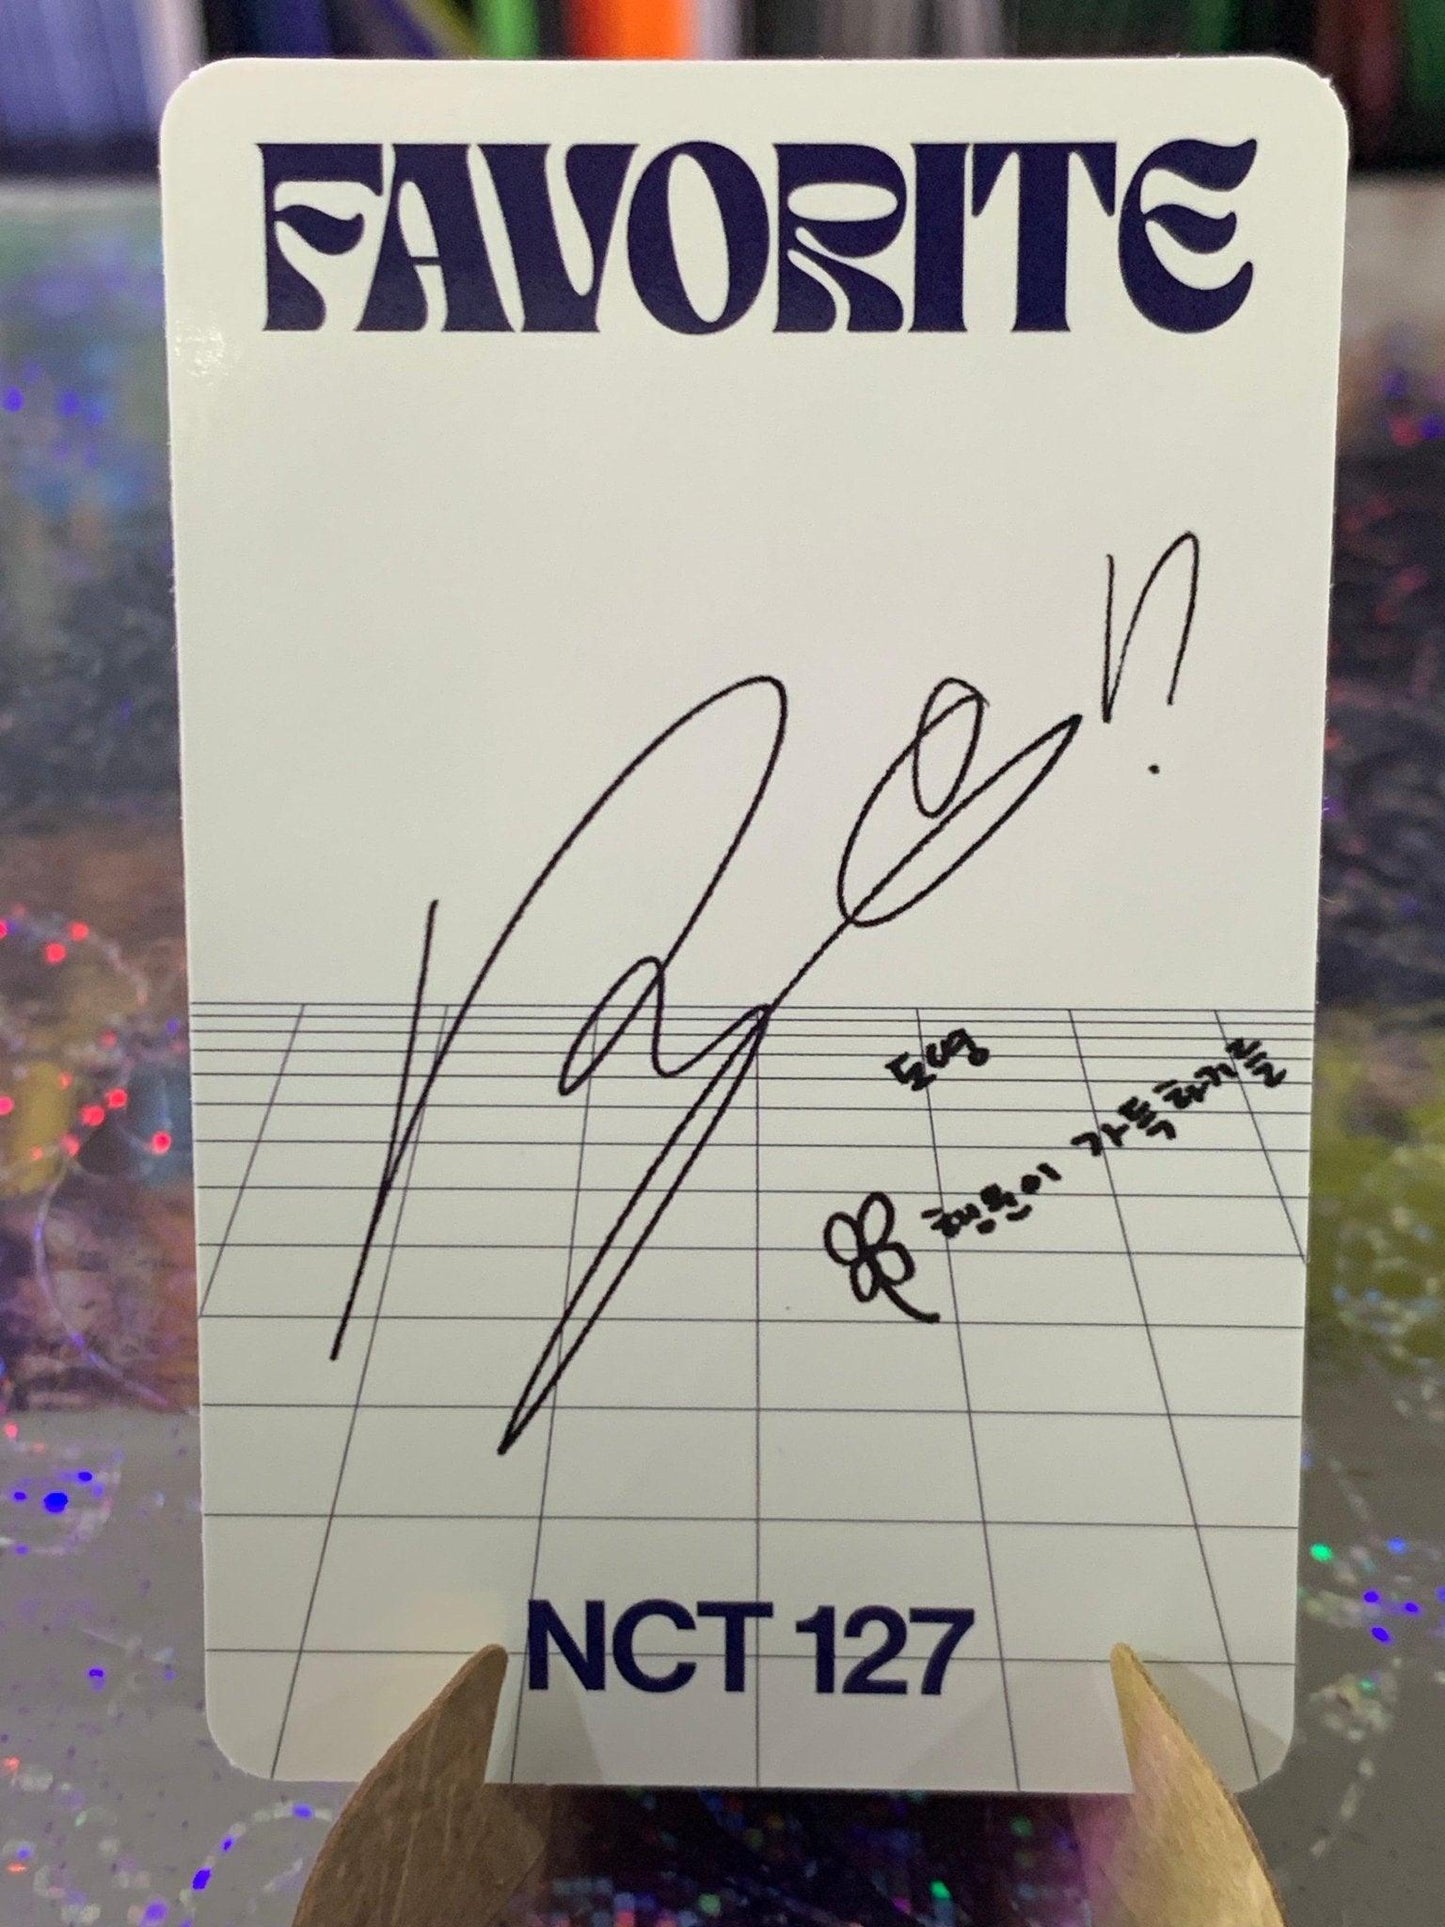 NCT 127 DOYOUNG - FAVORITE CATHARSIS - K-POP WORLD (7390646599815)